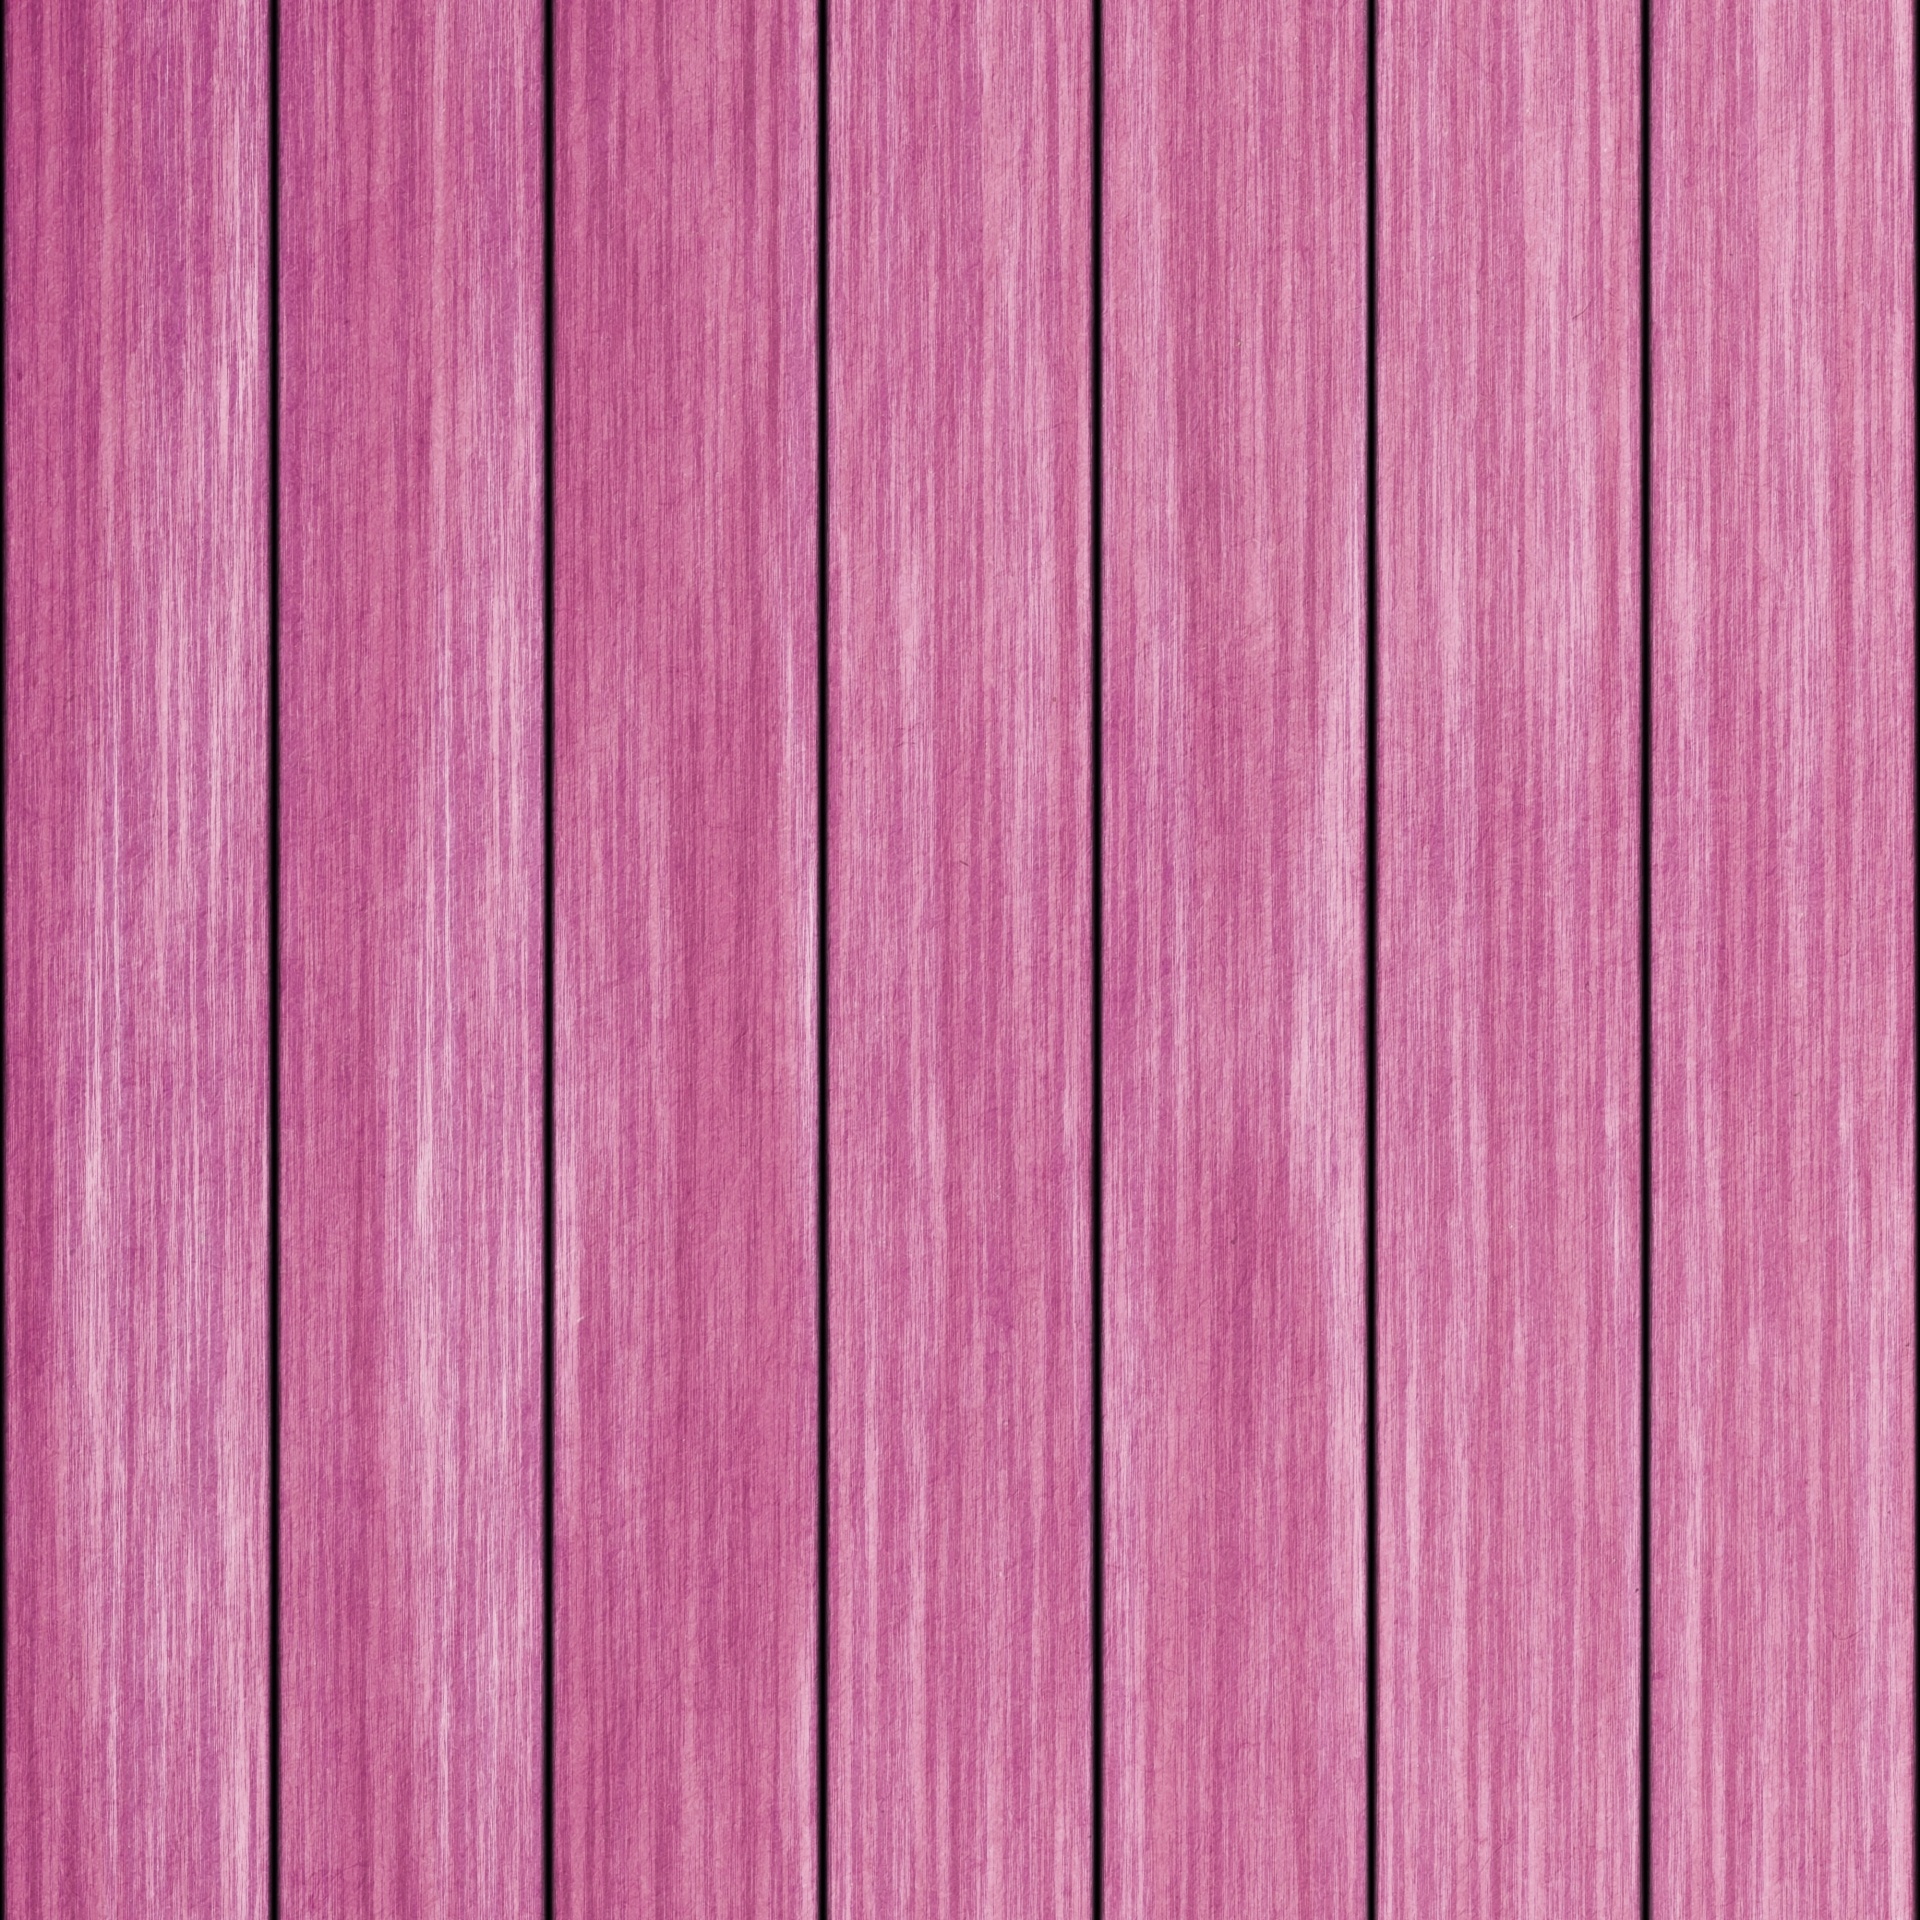 Wood Background Texture Wall